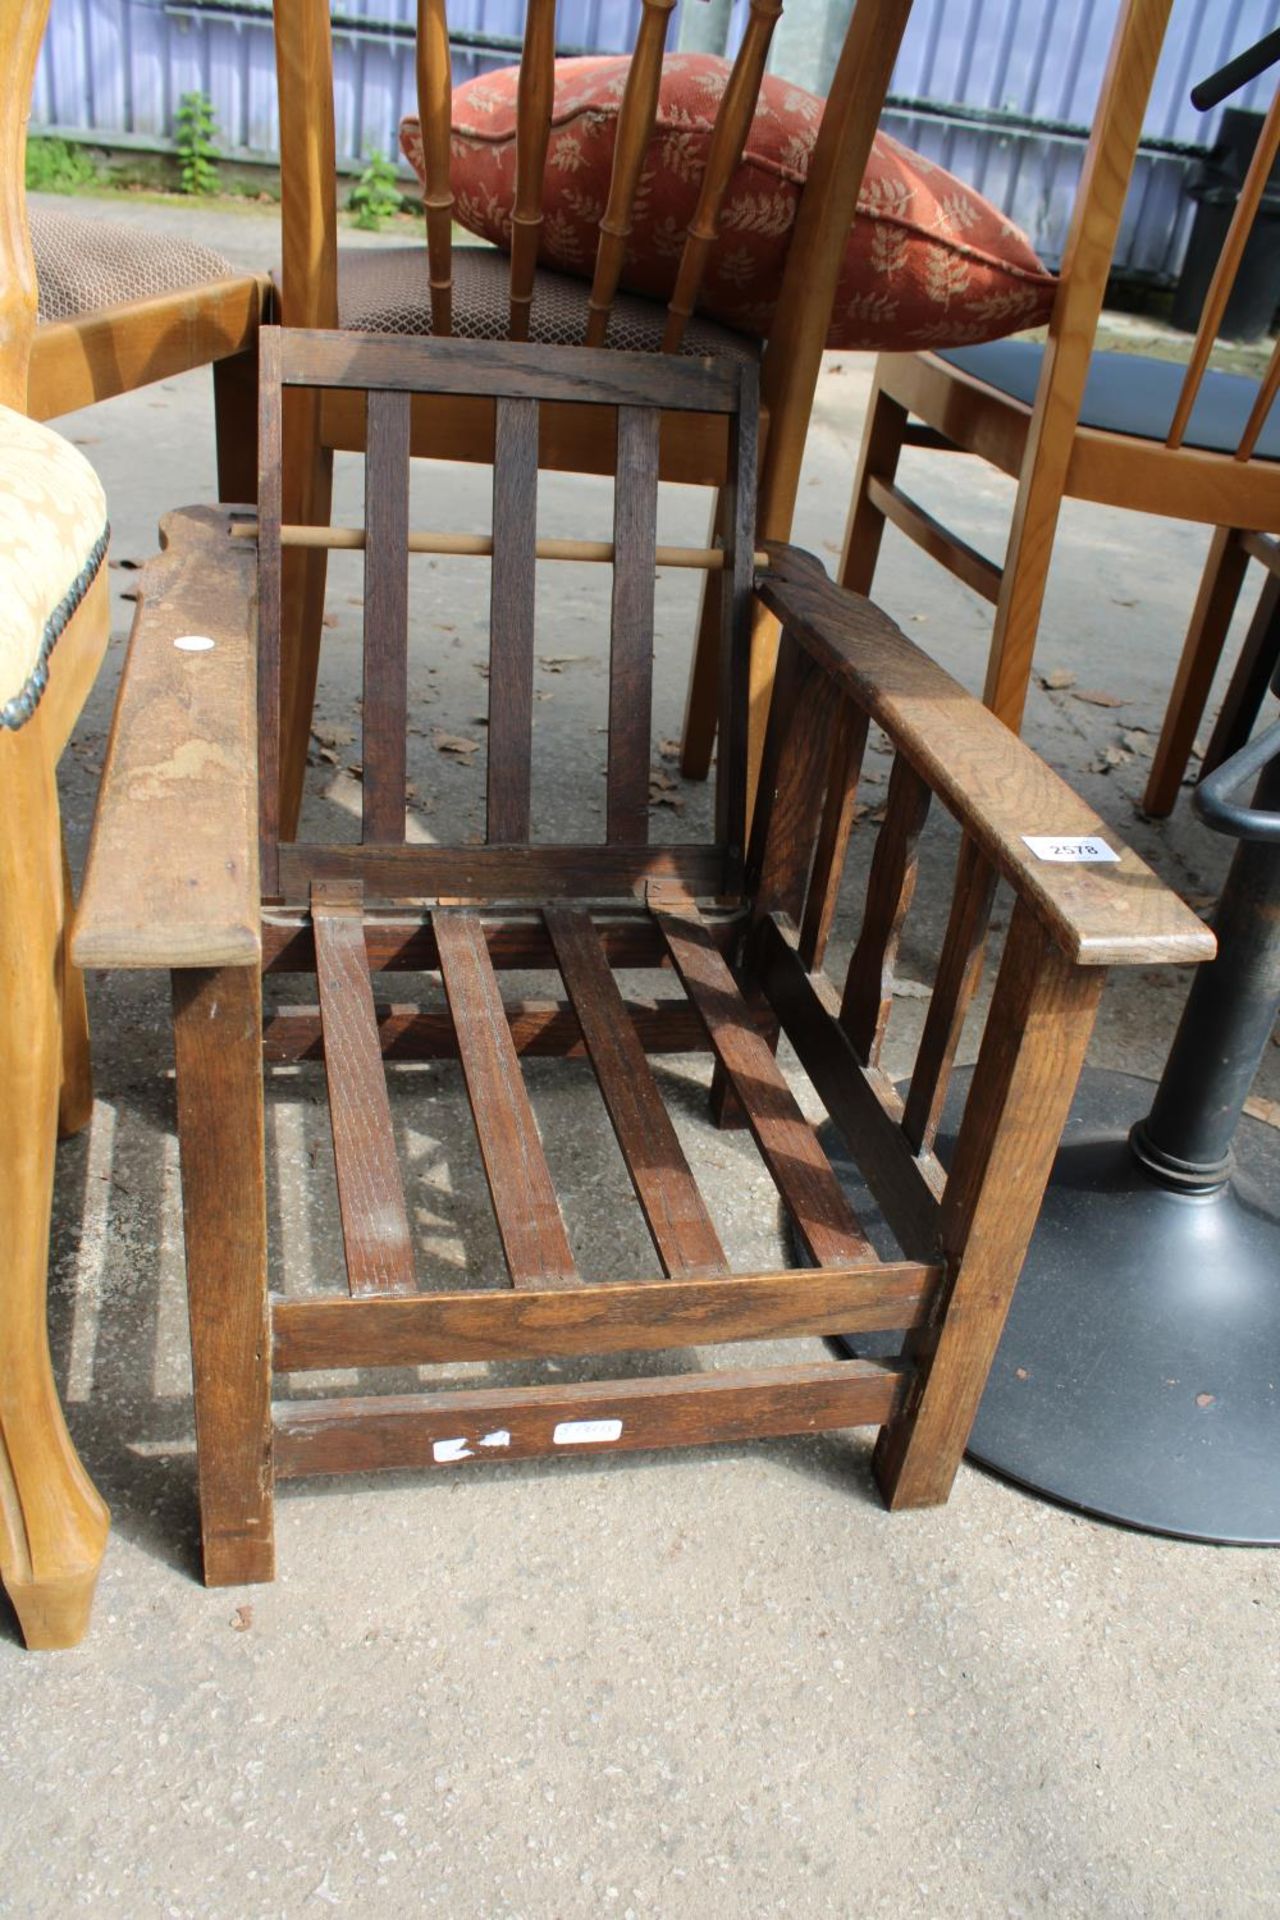 A PAIR OF VICTORIAN STYLE DINING CHAIRS AND OAK MID 20TH CENTURY CHILDS RECLINER CHAIR - Image 2 of 2